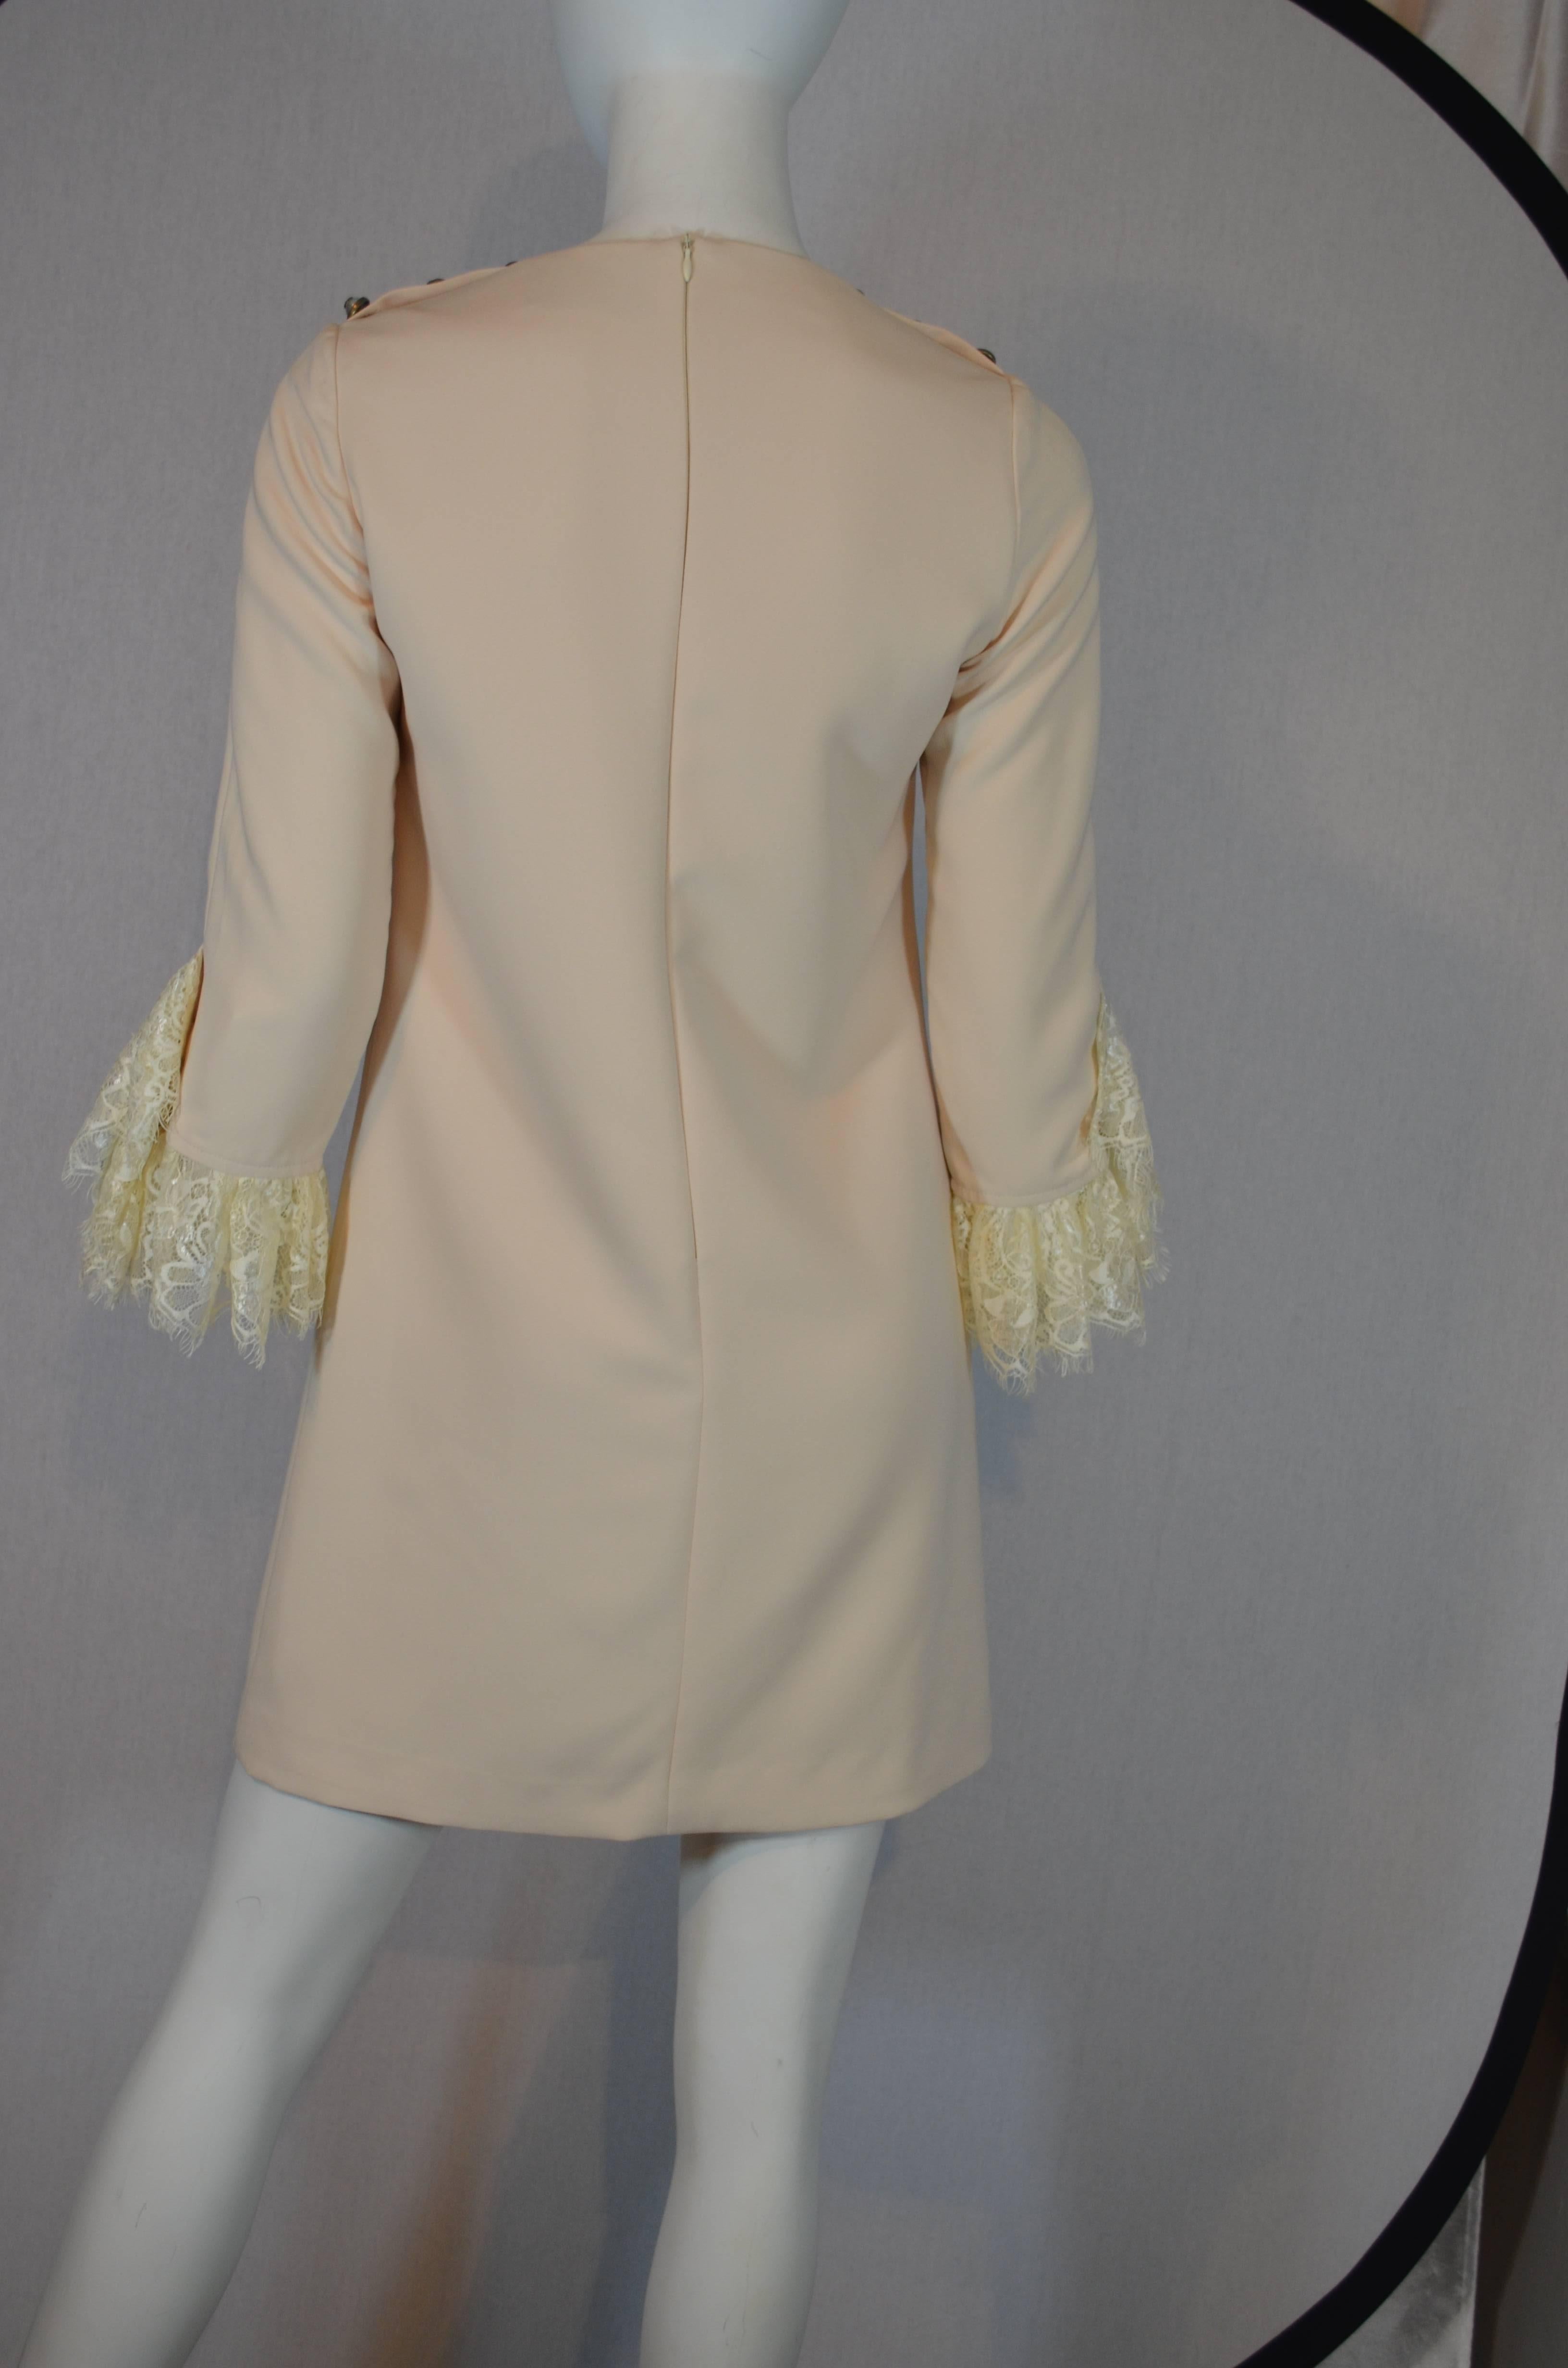 Gucci Embellished Dress 2016 In Excellent Condition In Carmel, CA